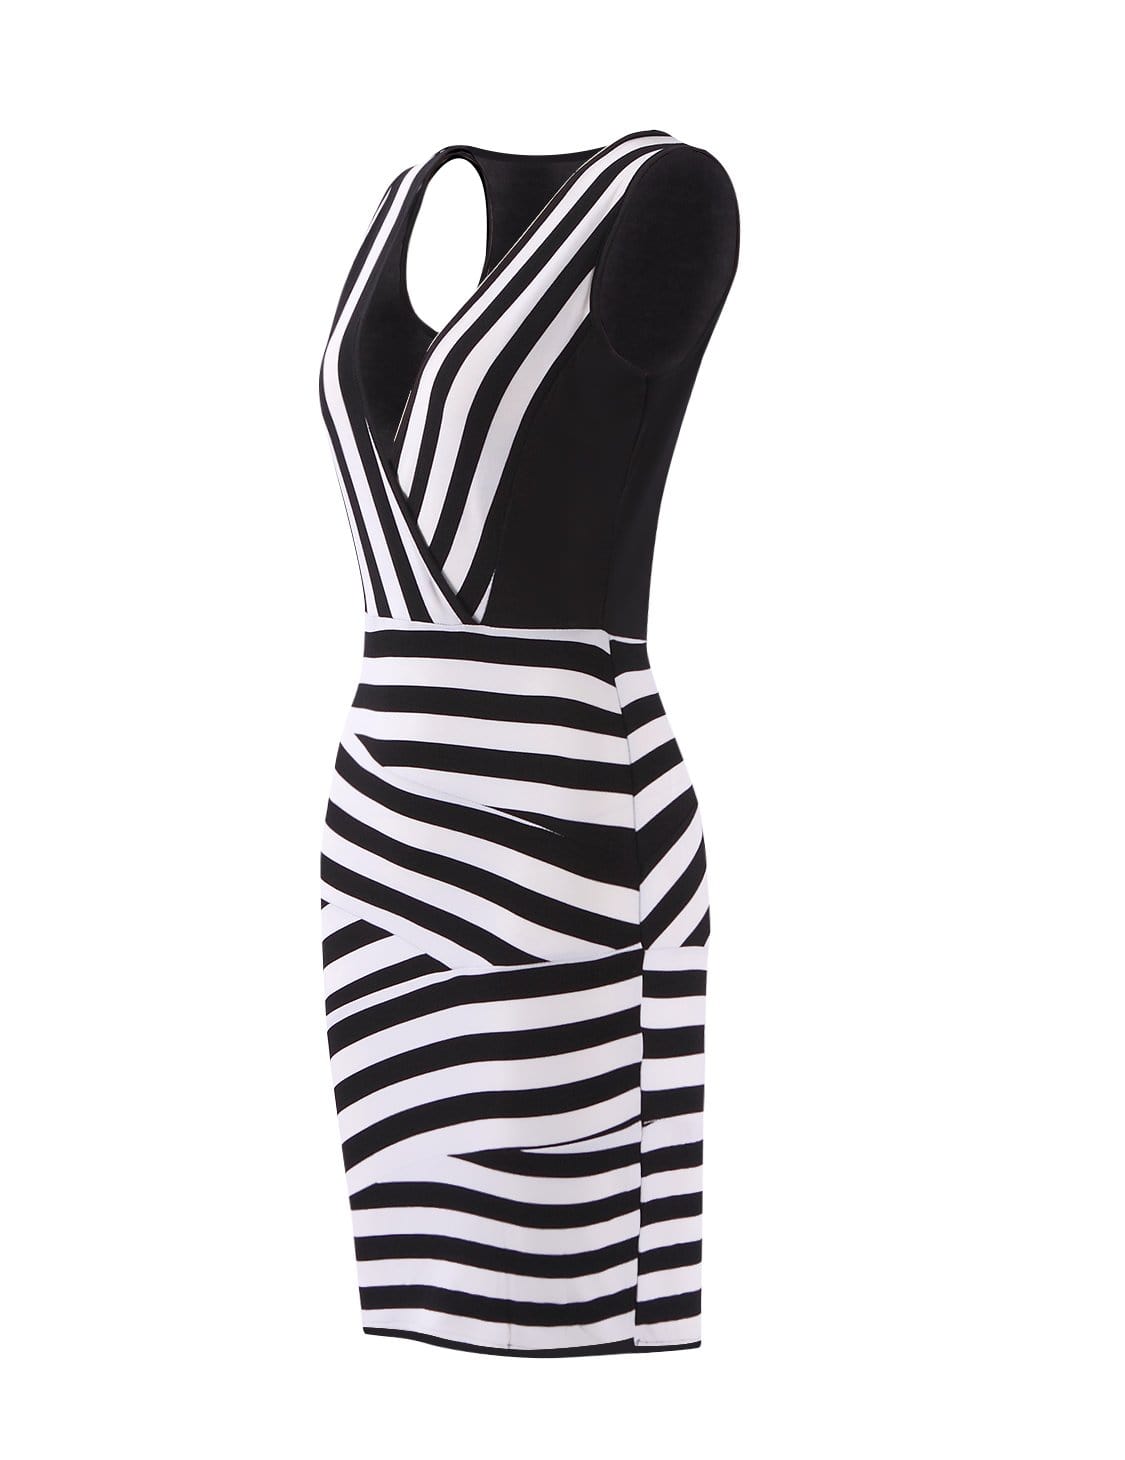 Color=Black and White | Alisa Pan Black And White Striped Skinny Short Dress-Black And White 3